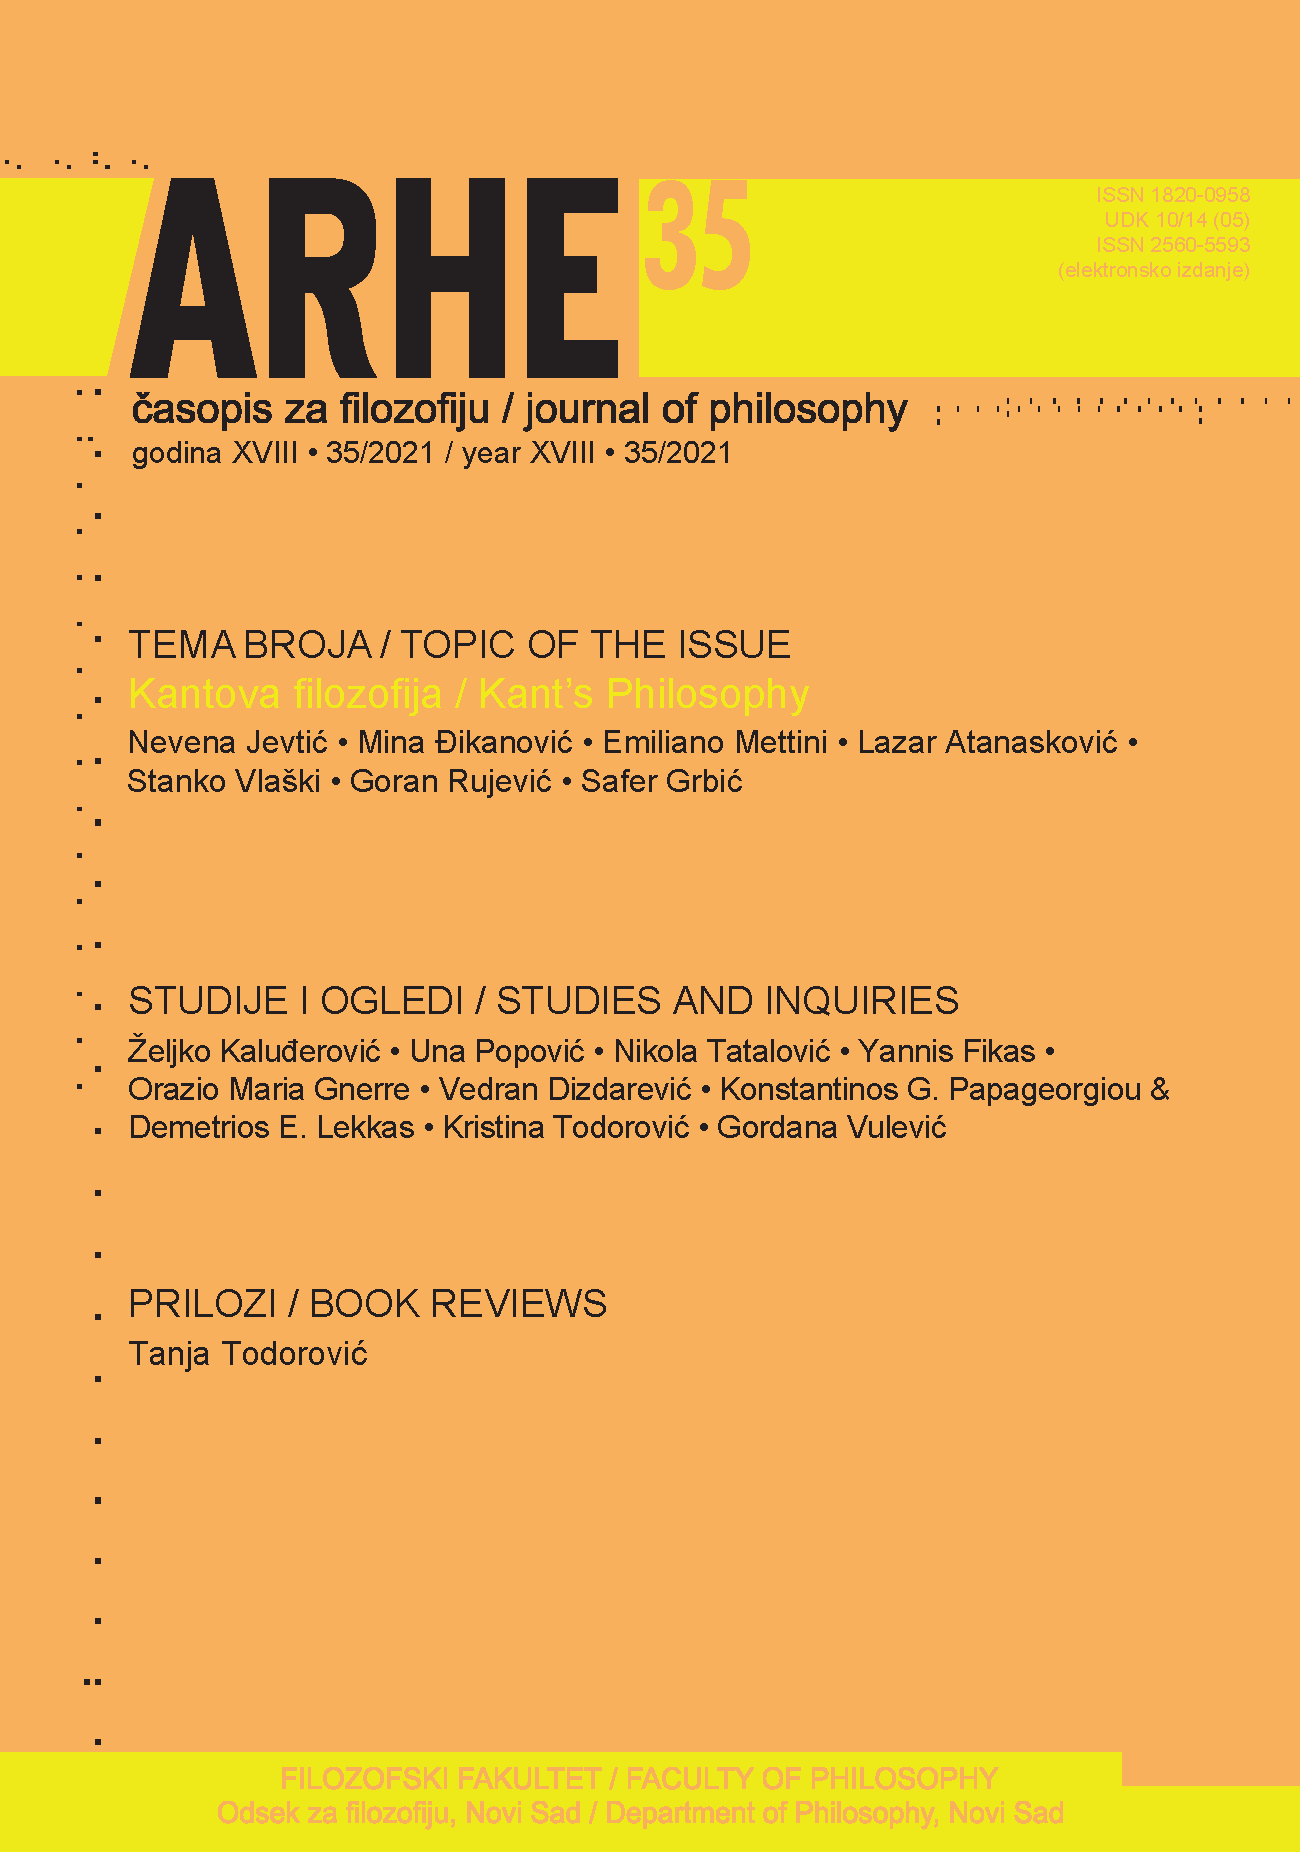 Universal Principles in Political Philosophy 
of Dante Alighieri and Immanuel Kant (Part I) Cover Image